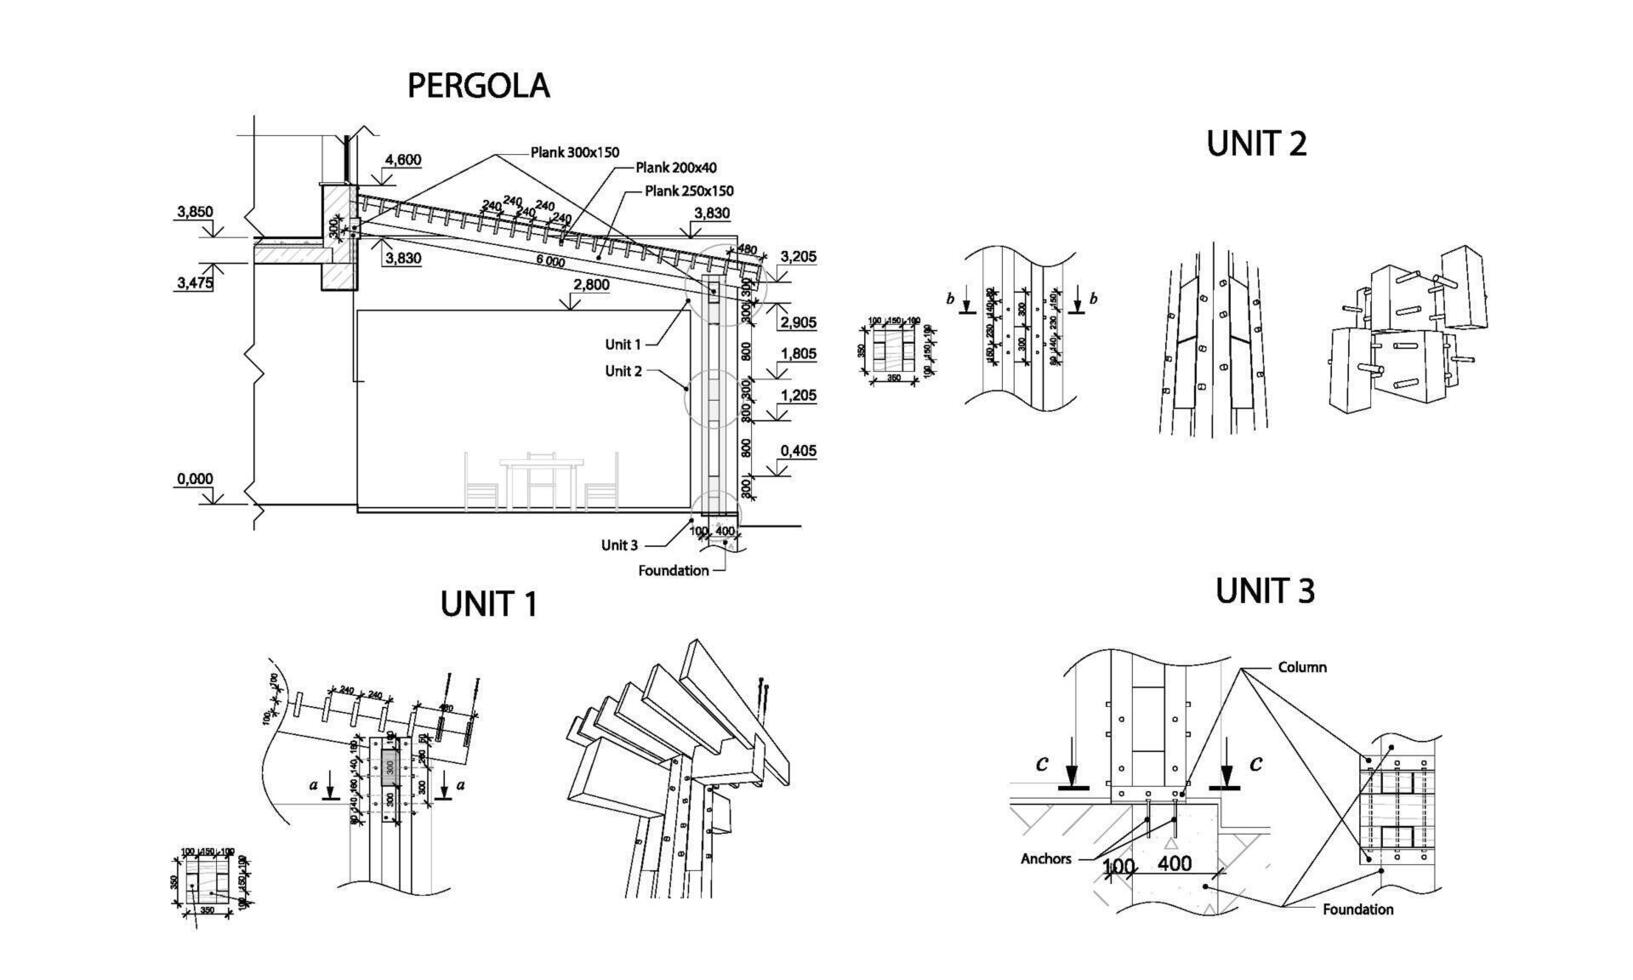 Set of units, detailed architectural technical drawing of pergola, vector blueprint